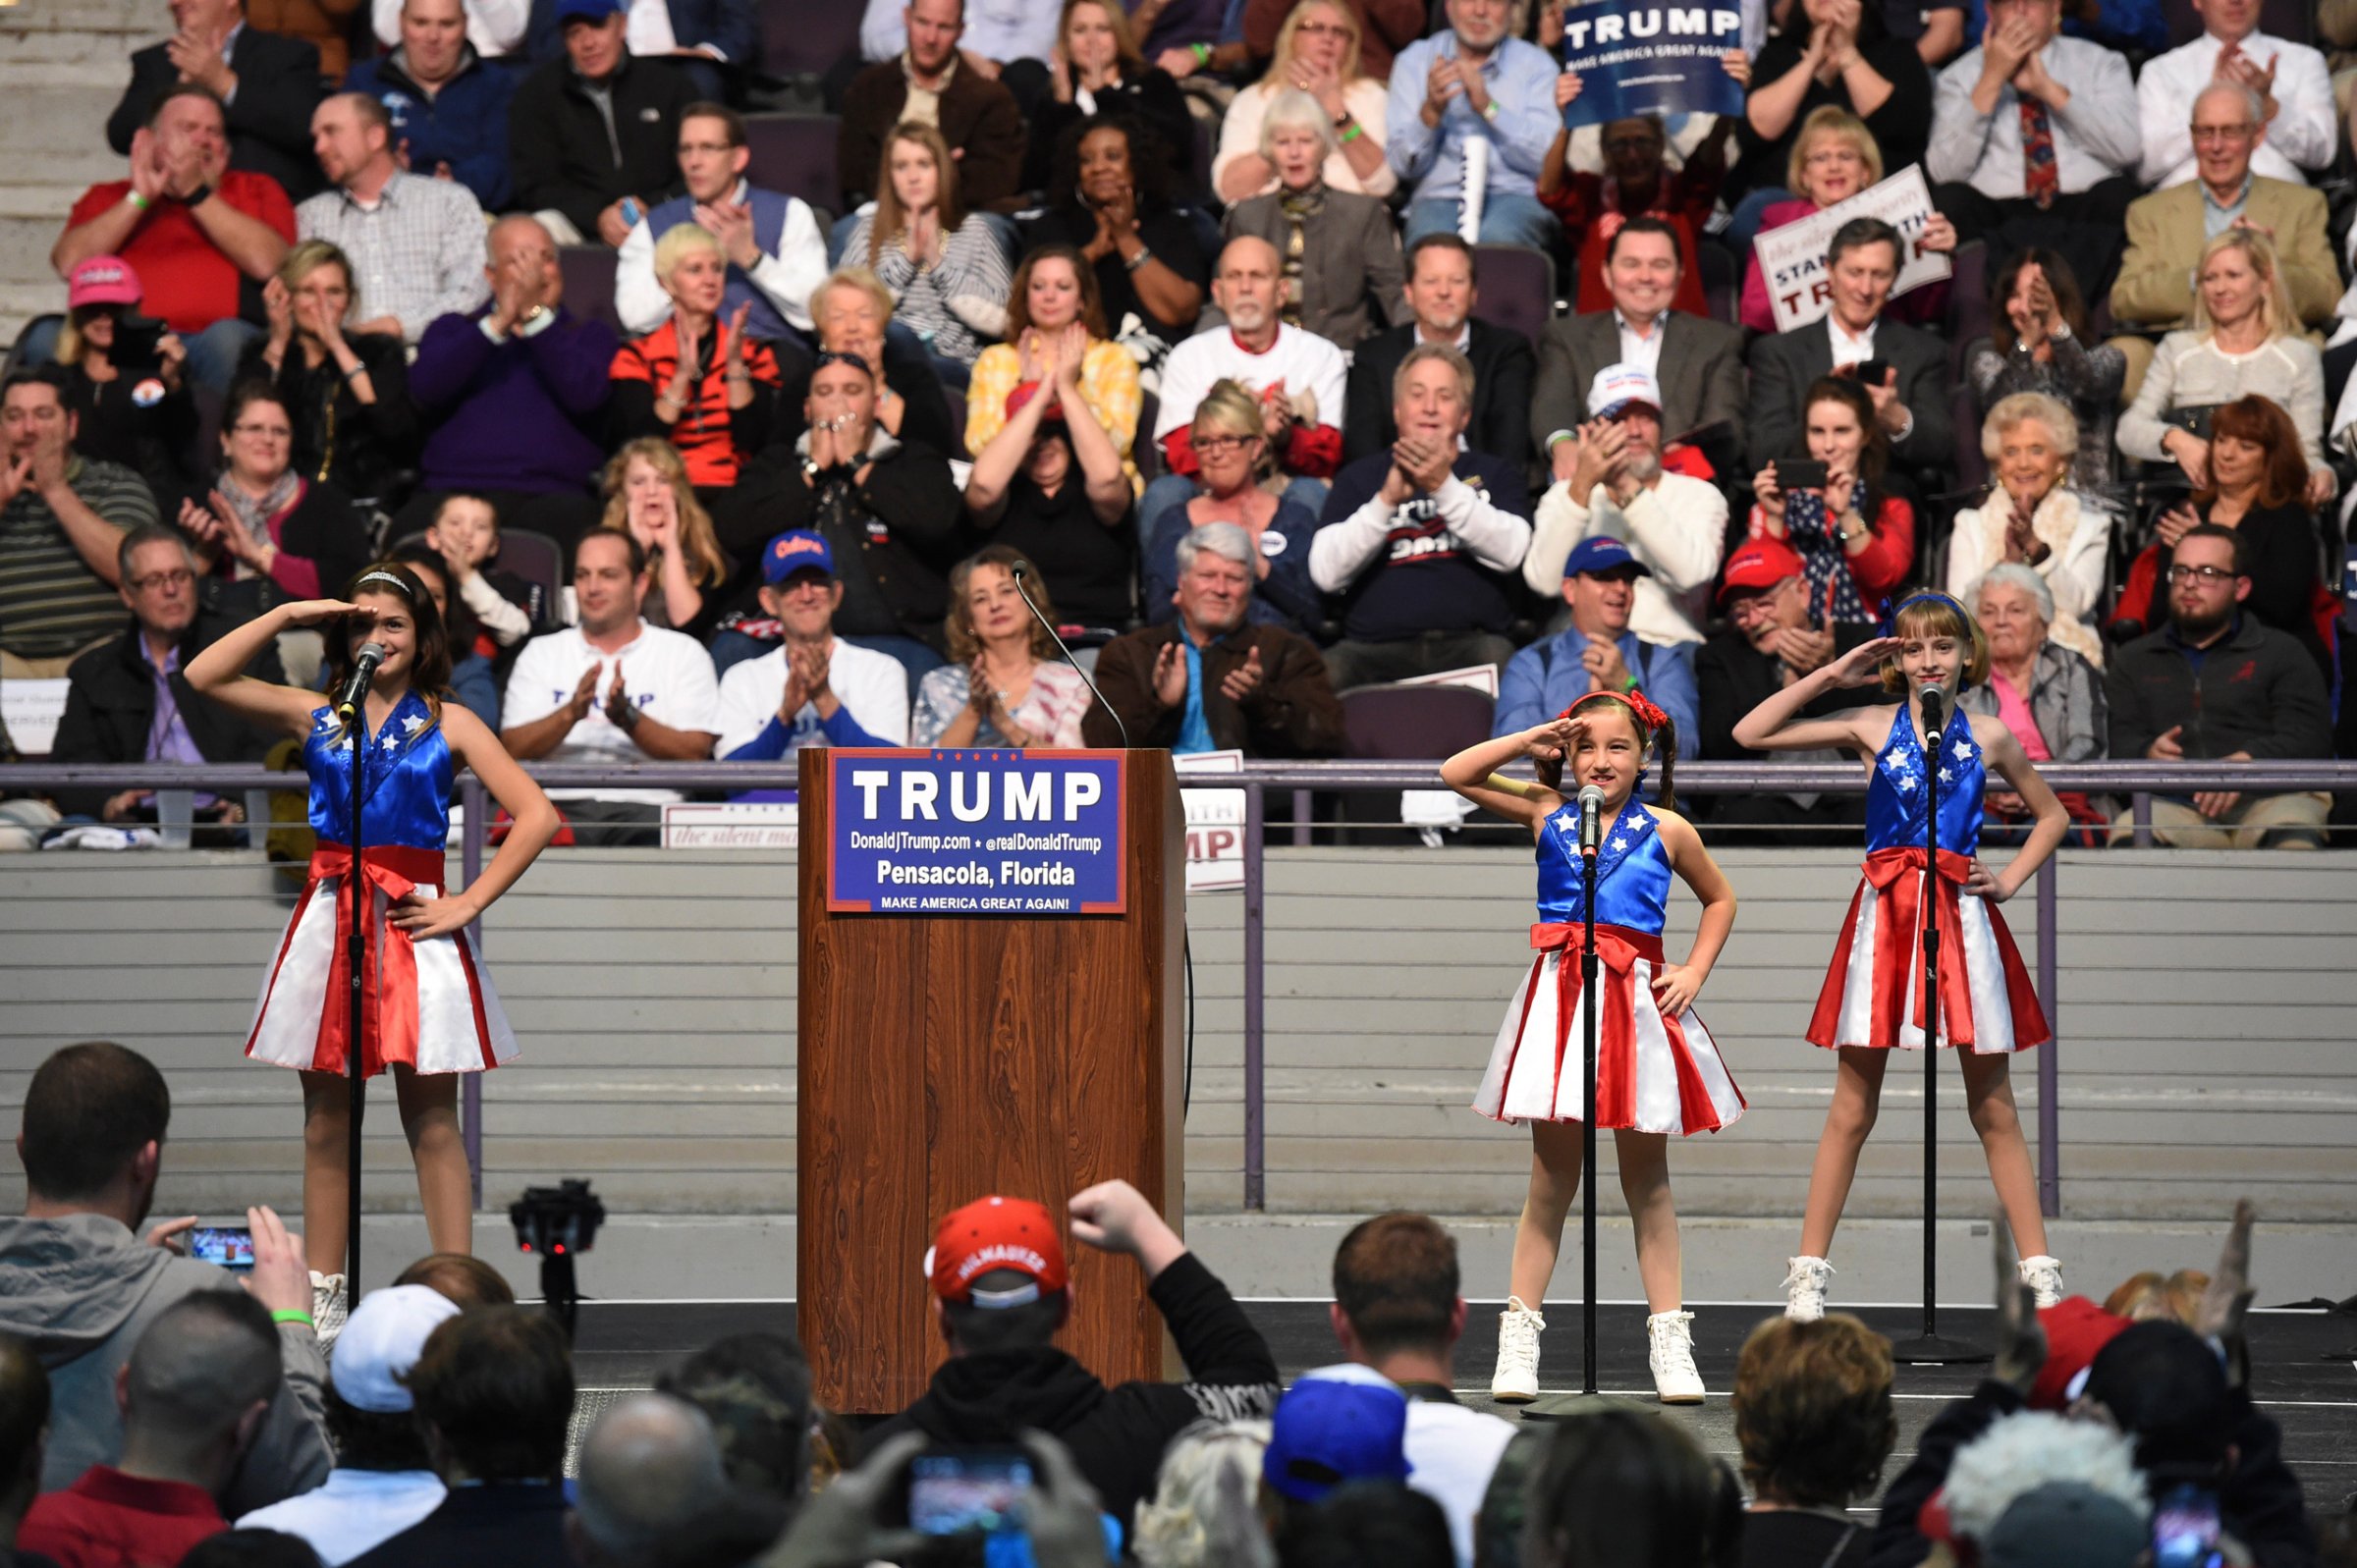 The USA The USA Freedom Kids from Pensacola perform "Freedom's Call" which has become known as the "Trump Jam" during the U.S. Republican presidential candidate Donald Trump's campaign rally in Pensacola, Florida January 13, 2016. Picture taken January 13, 2016. REUTERS/Michael Spooneybarger - RTX22L49Freedom Kids from Pensacola perform "Freedom's Call" which has become known as the "Trump Jam" during candidate Donald Trump's campaign rally in Pensacola